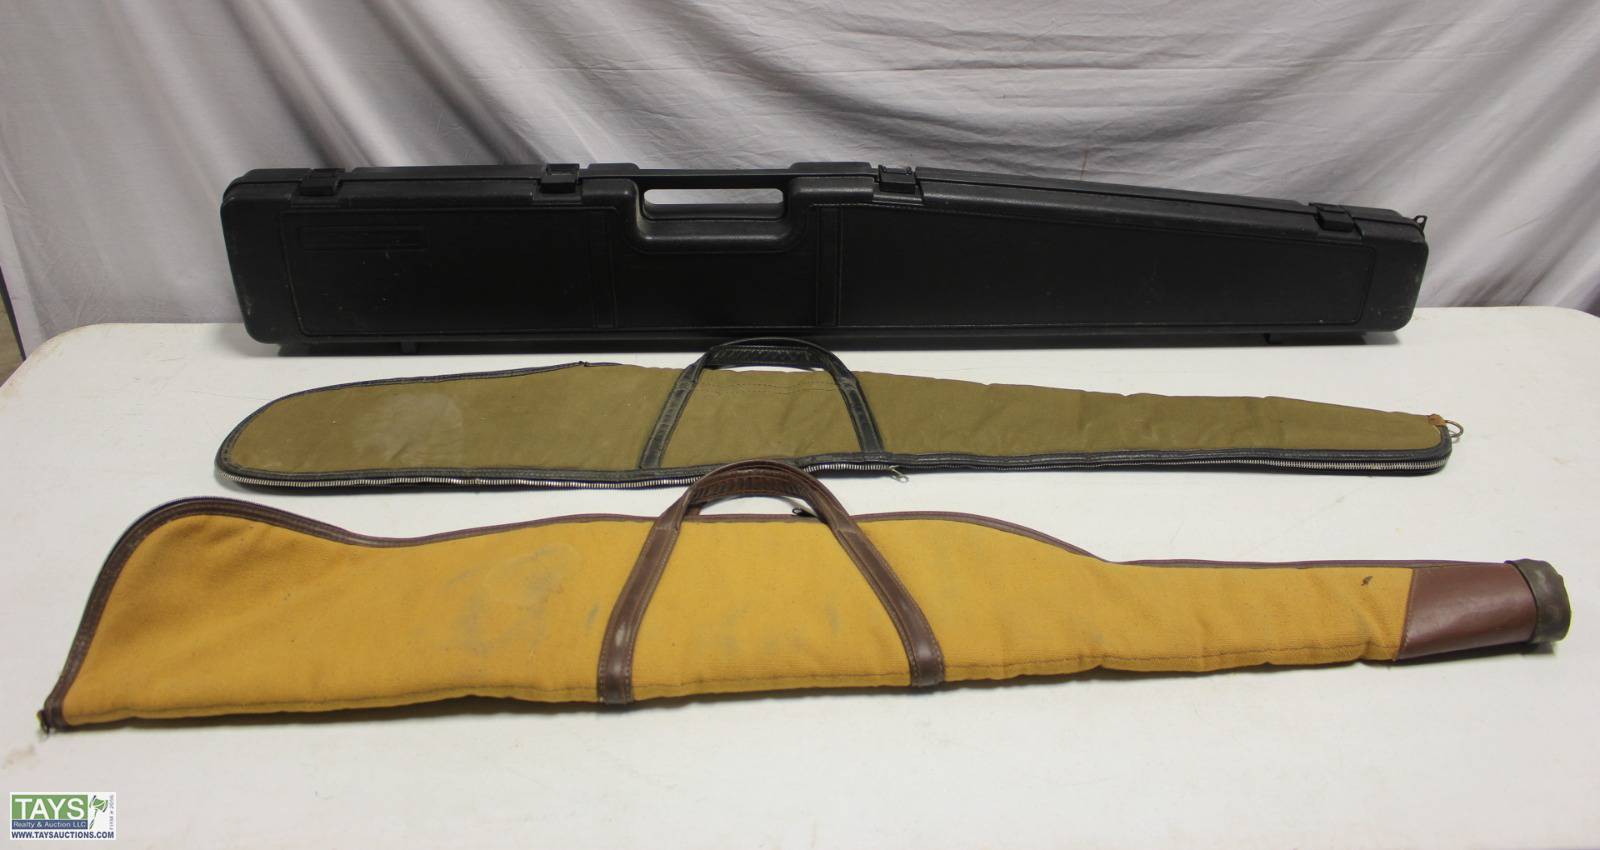 Tays Realty & Auction - Auction: ONLINE ABSOLUTE AUCTION: FURNITURE -  CHAMPION SAFE - ART PRINTS - POTTERY ITEM: Two Soft Sleeve and One Hard  Plastic Gun Cases